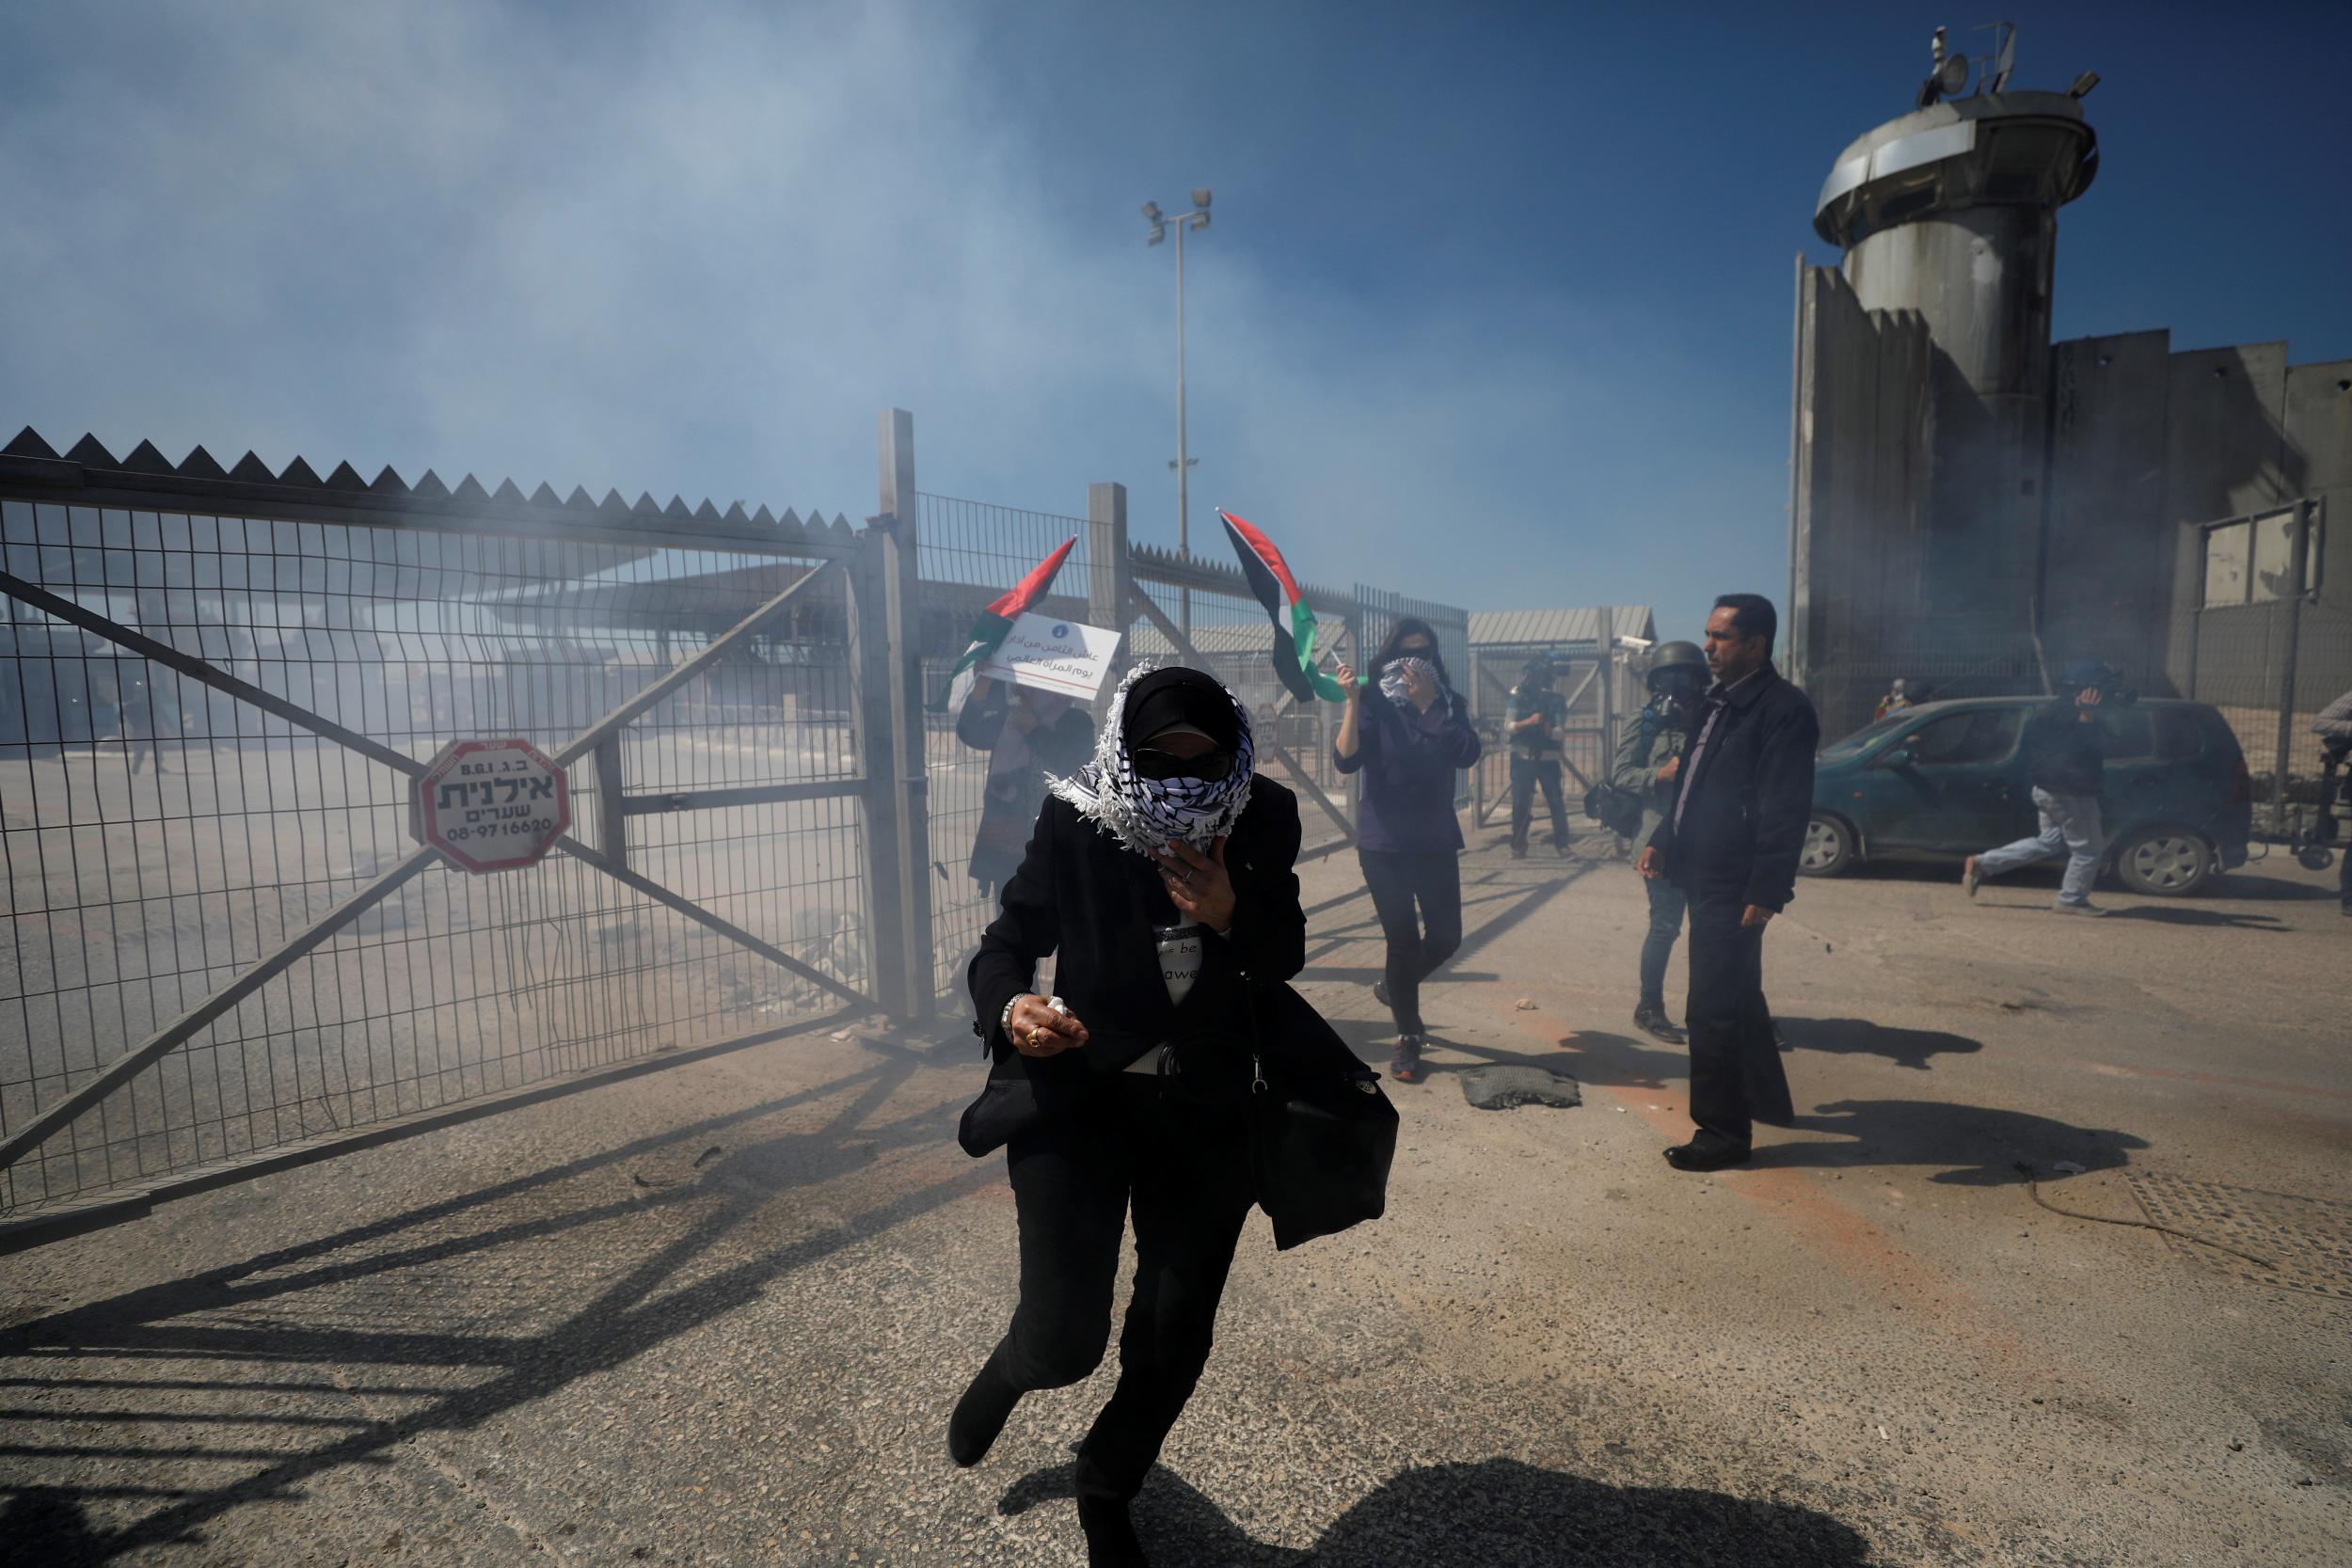 A Palestinian woman runs from tear gas fired by Israeli troops during clashes at a protest against US President Donald Trump's decision on Jerusalem in Ramallah in the occupied West Bank on 7 March 2018